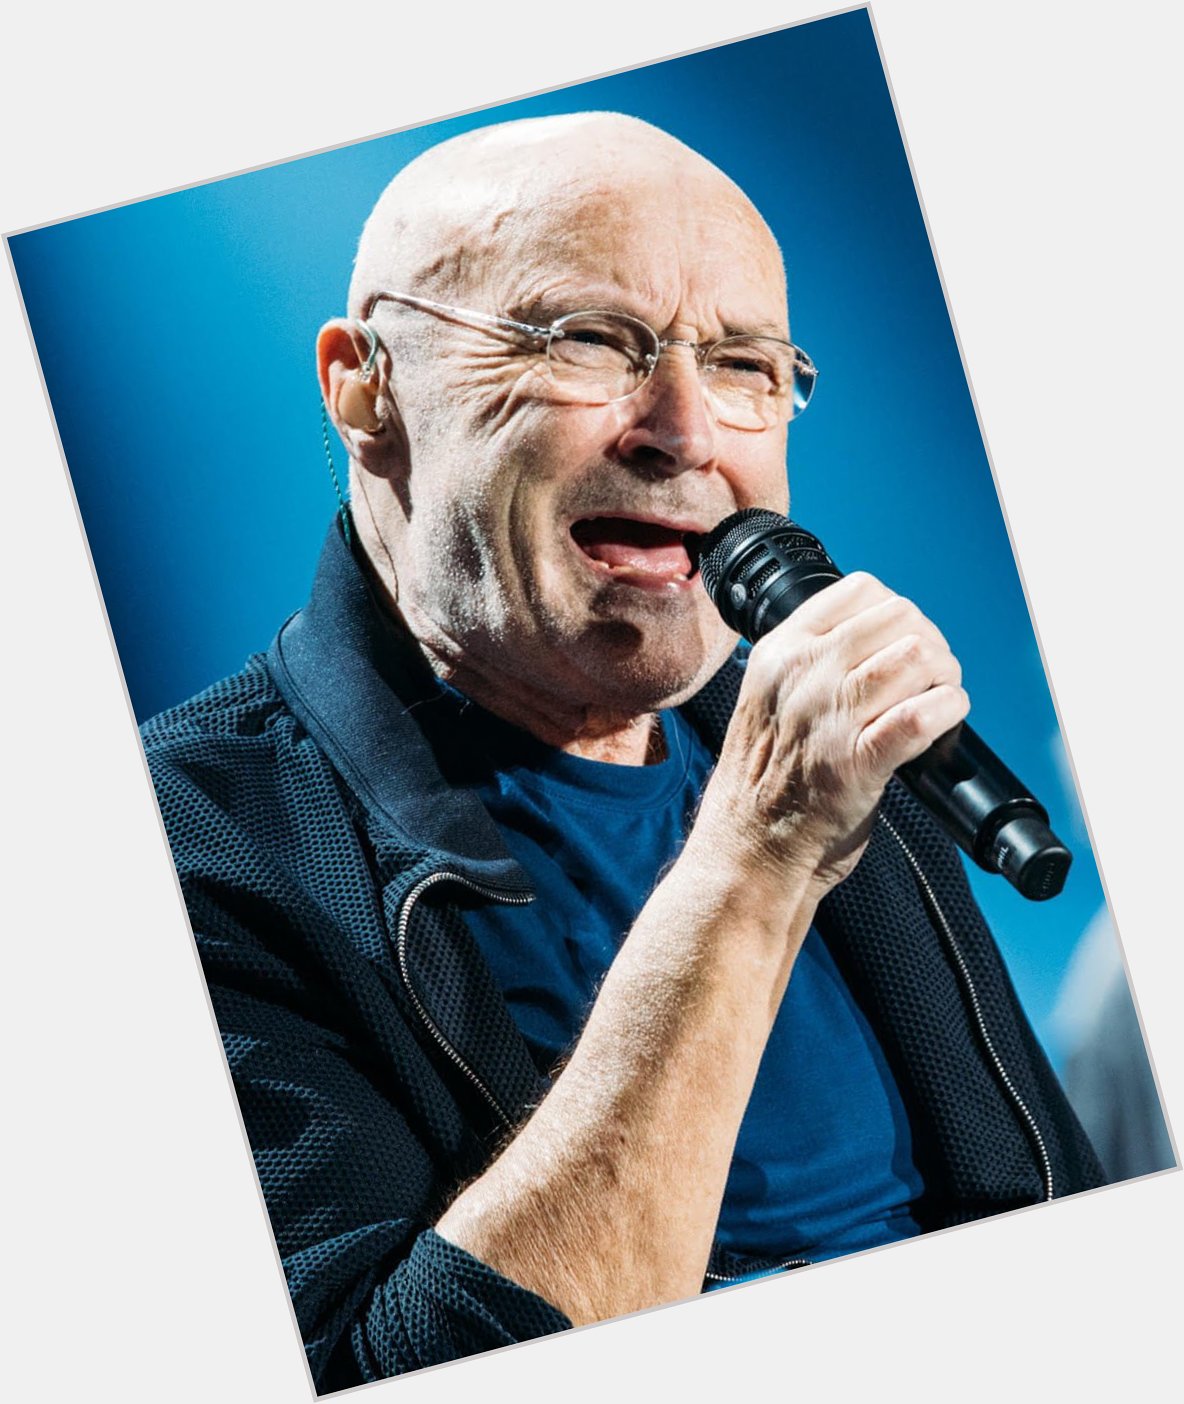 Wishing Phil Collins a very Happy Birthday   